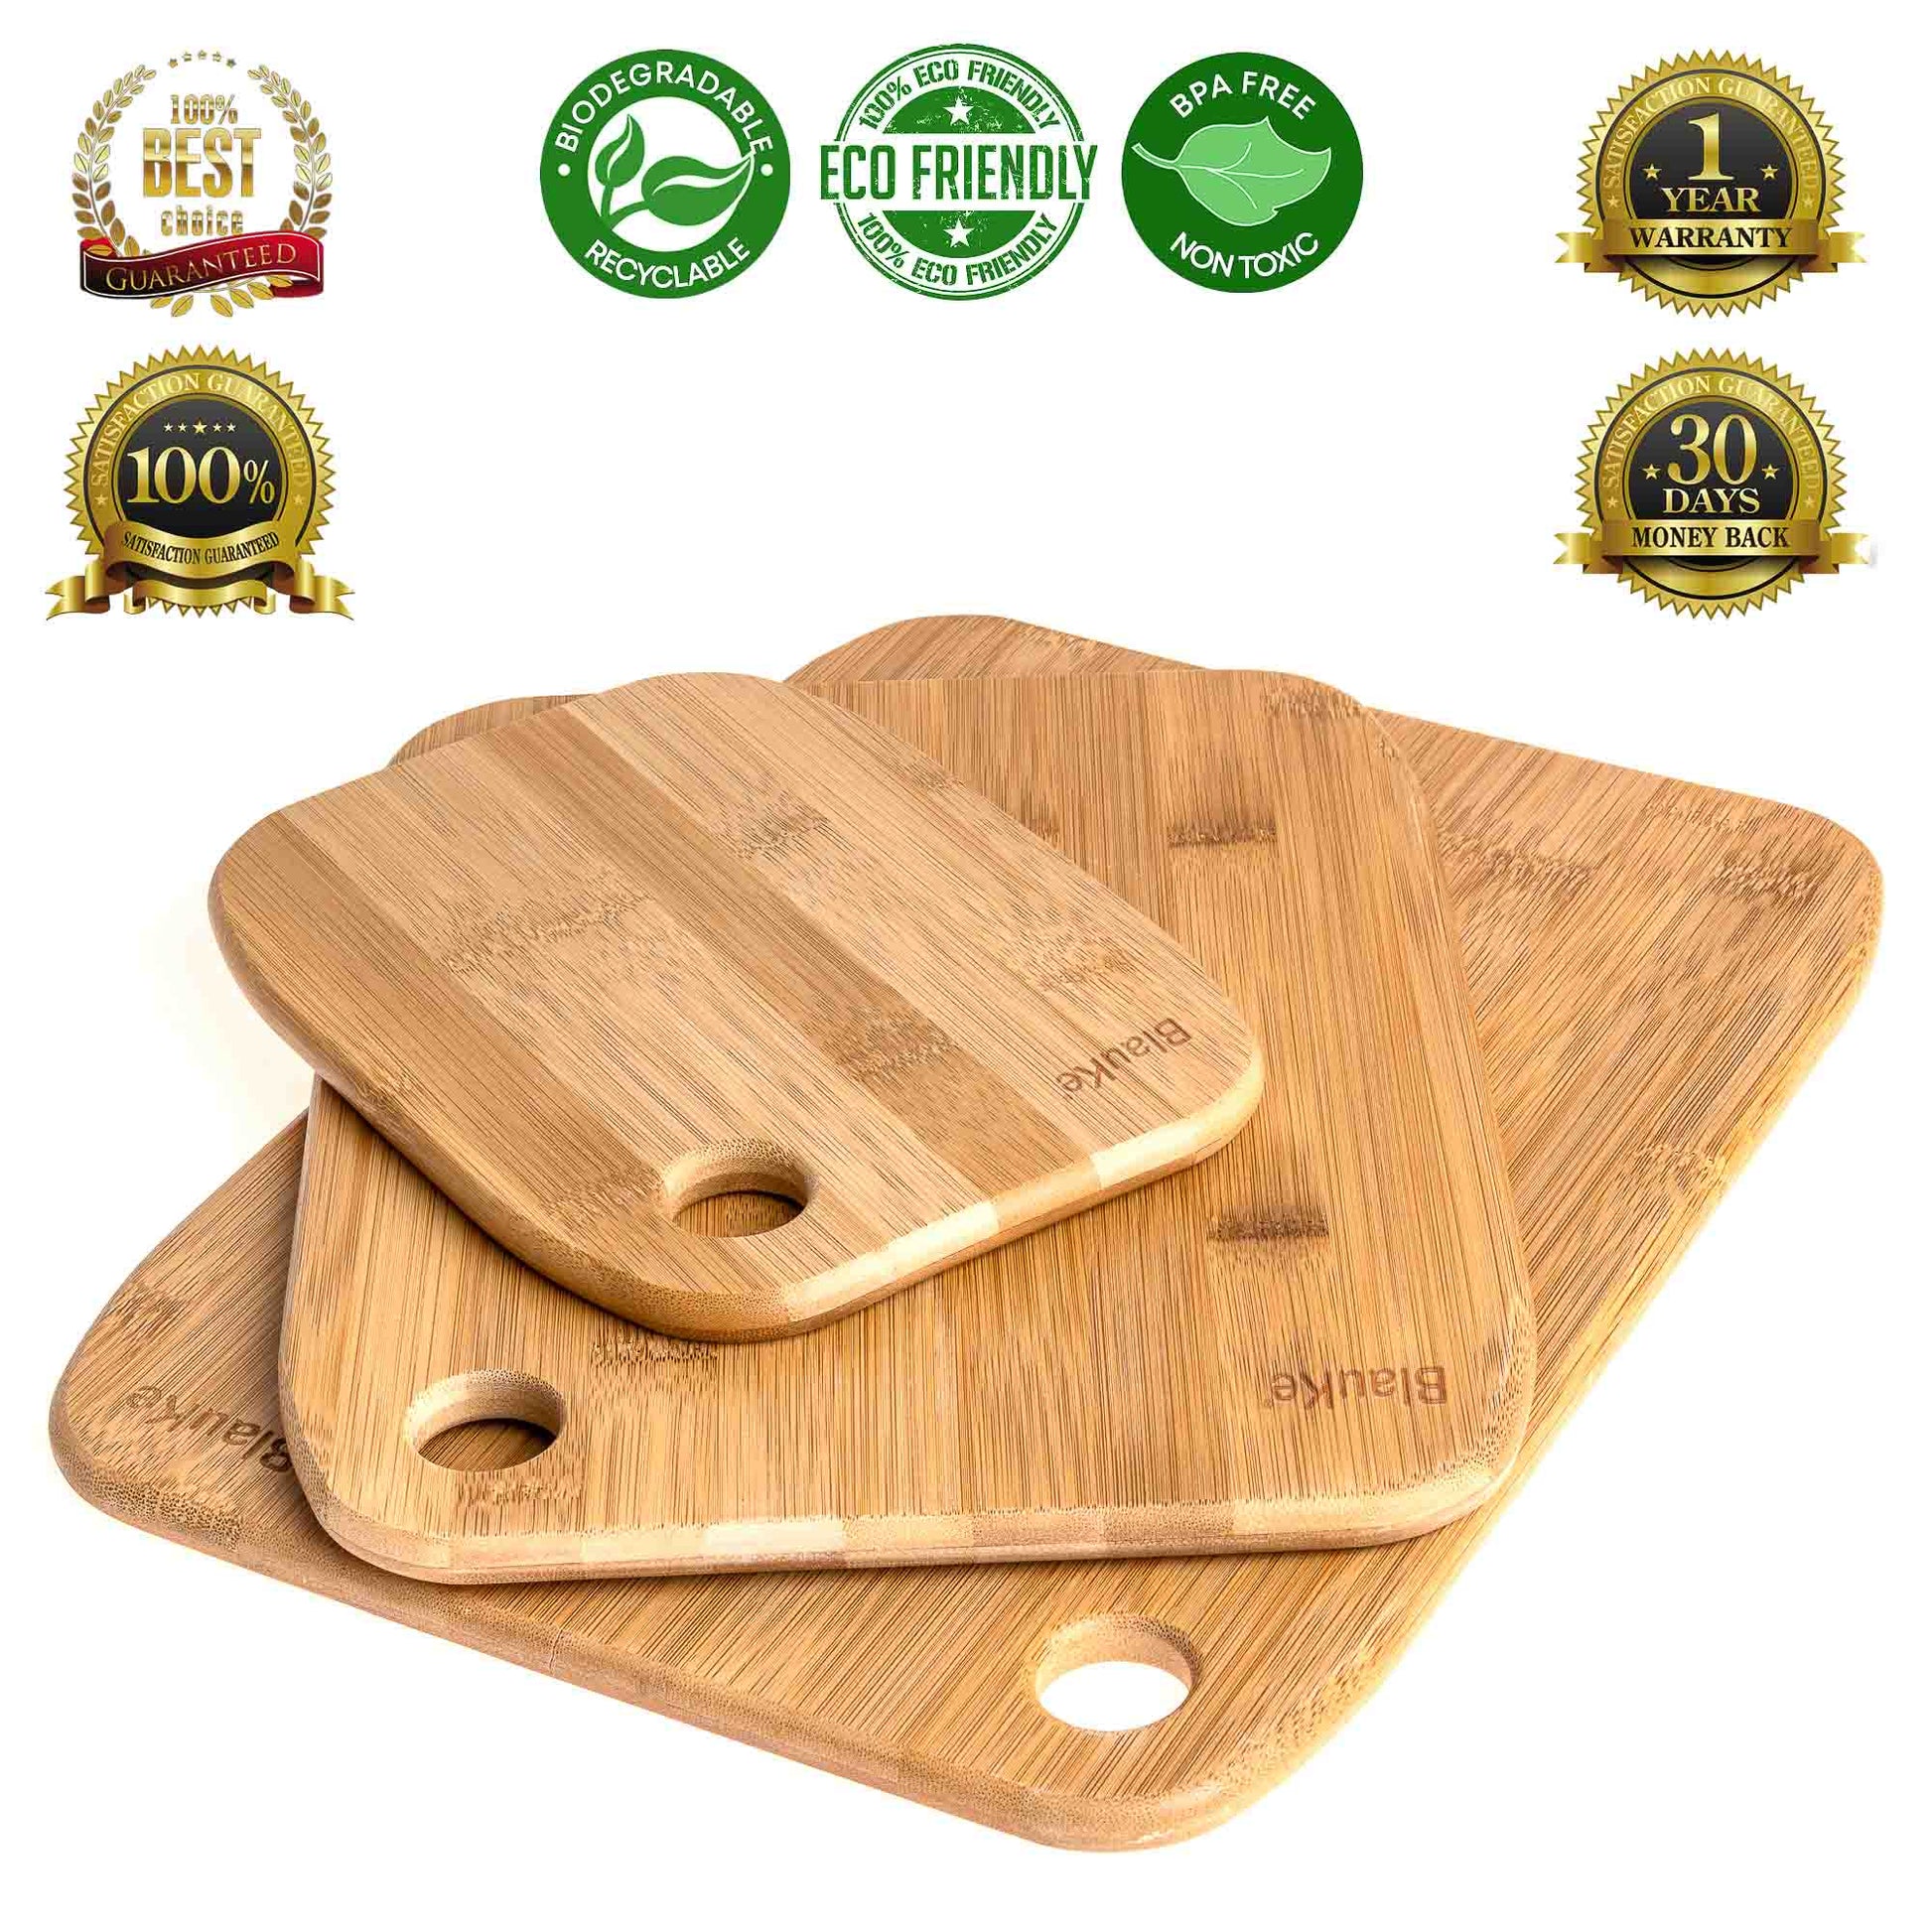 Wooden Cutting Boards for Kitchen - Bamboo Chopping Board Set of 3-1